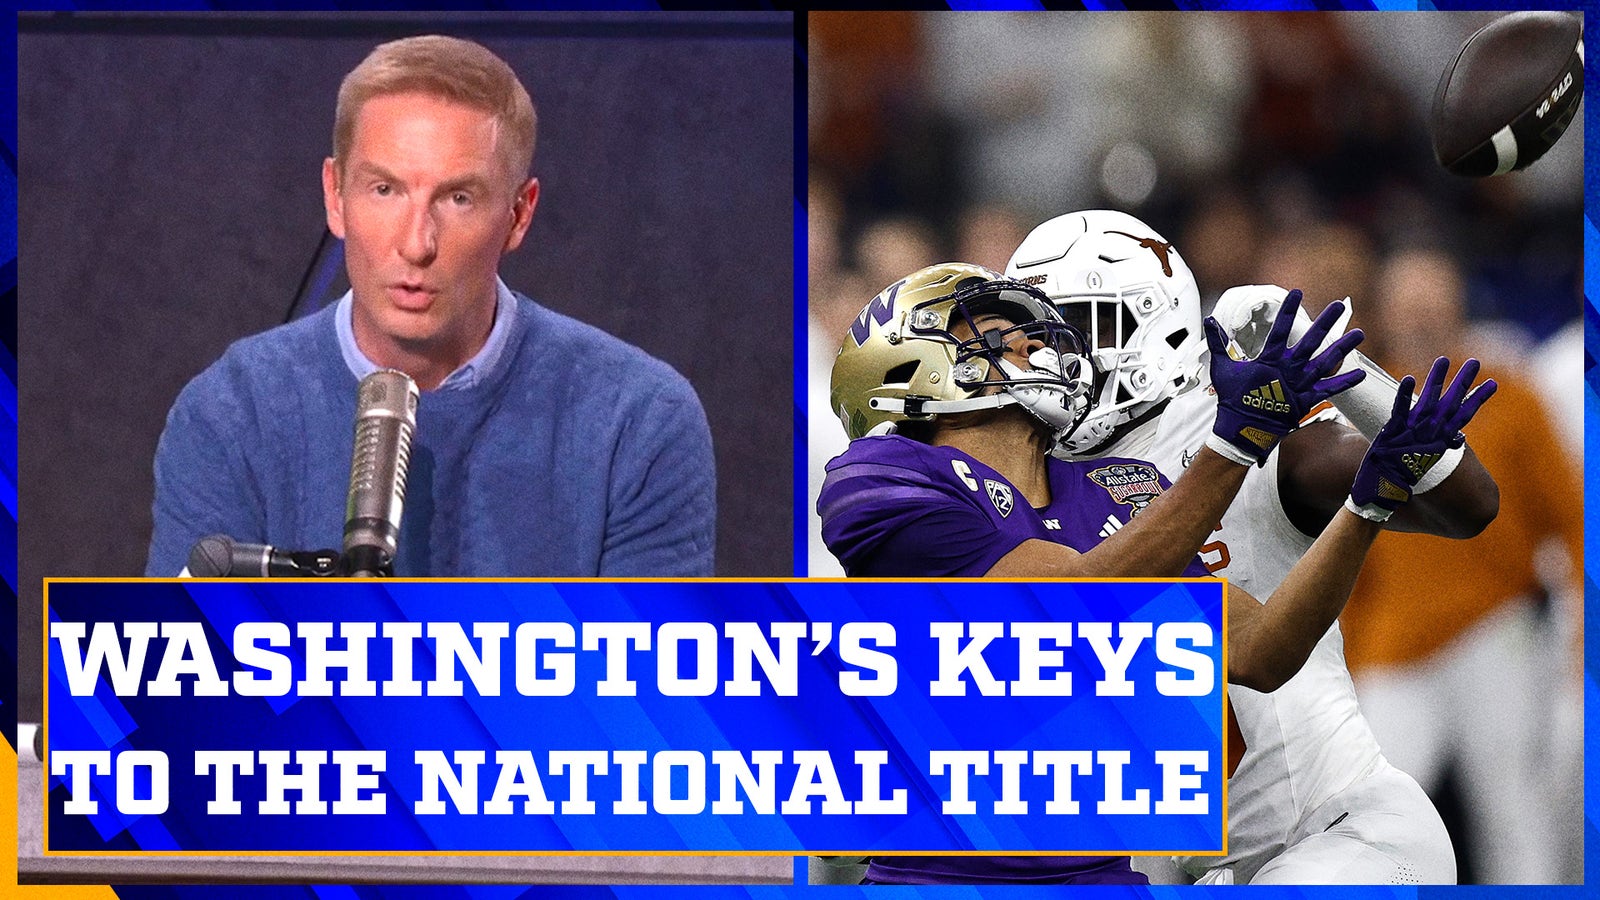 Could Washington’s passing game help them earn the National Championship?